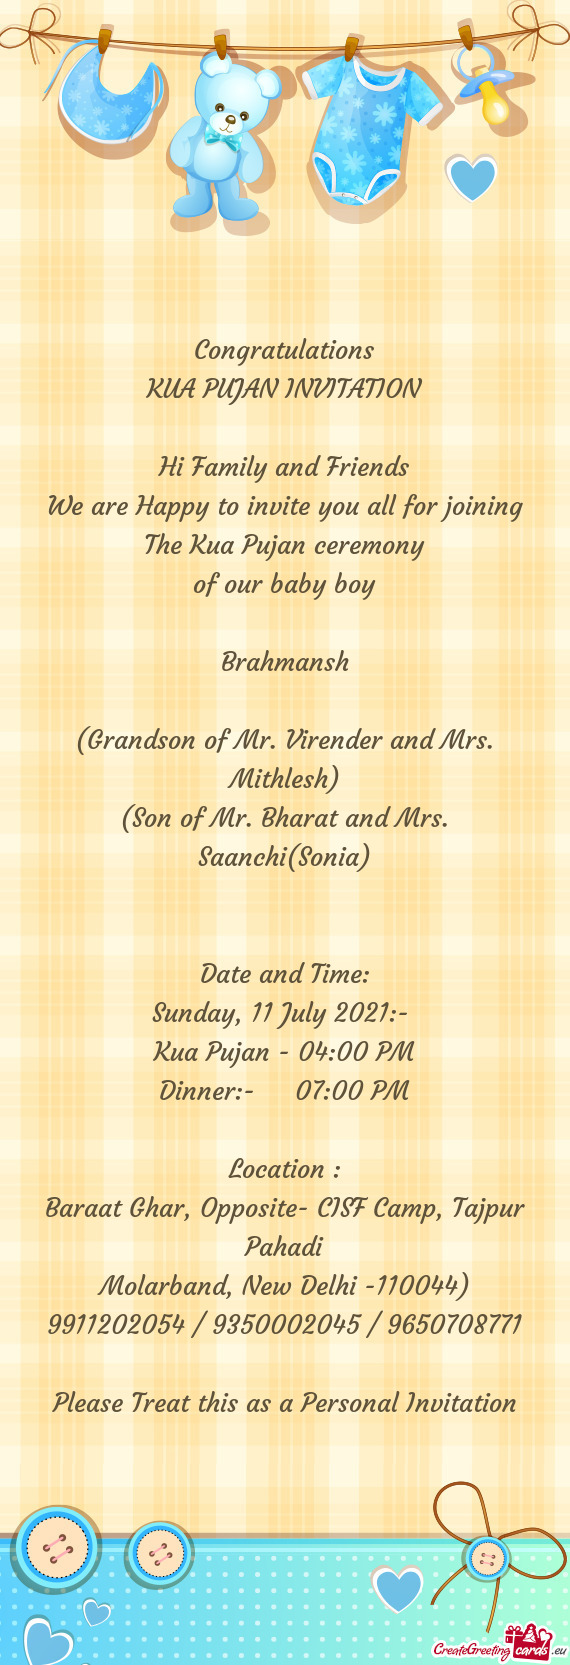 (Son of Mr. Bharat and Mrs. Saanchi(Sonia)